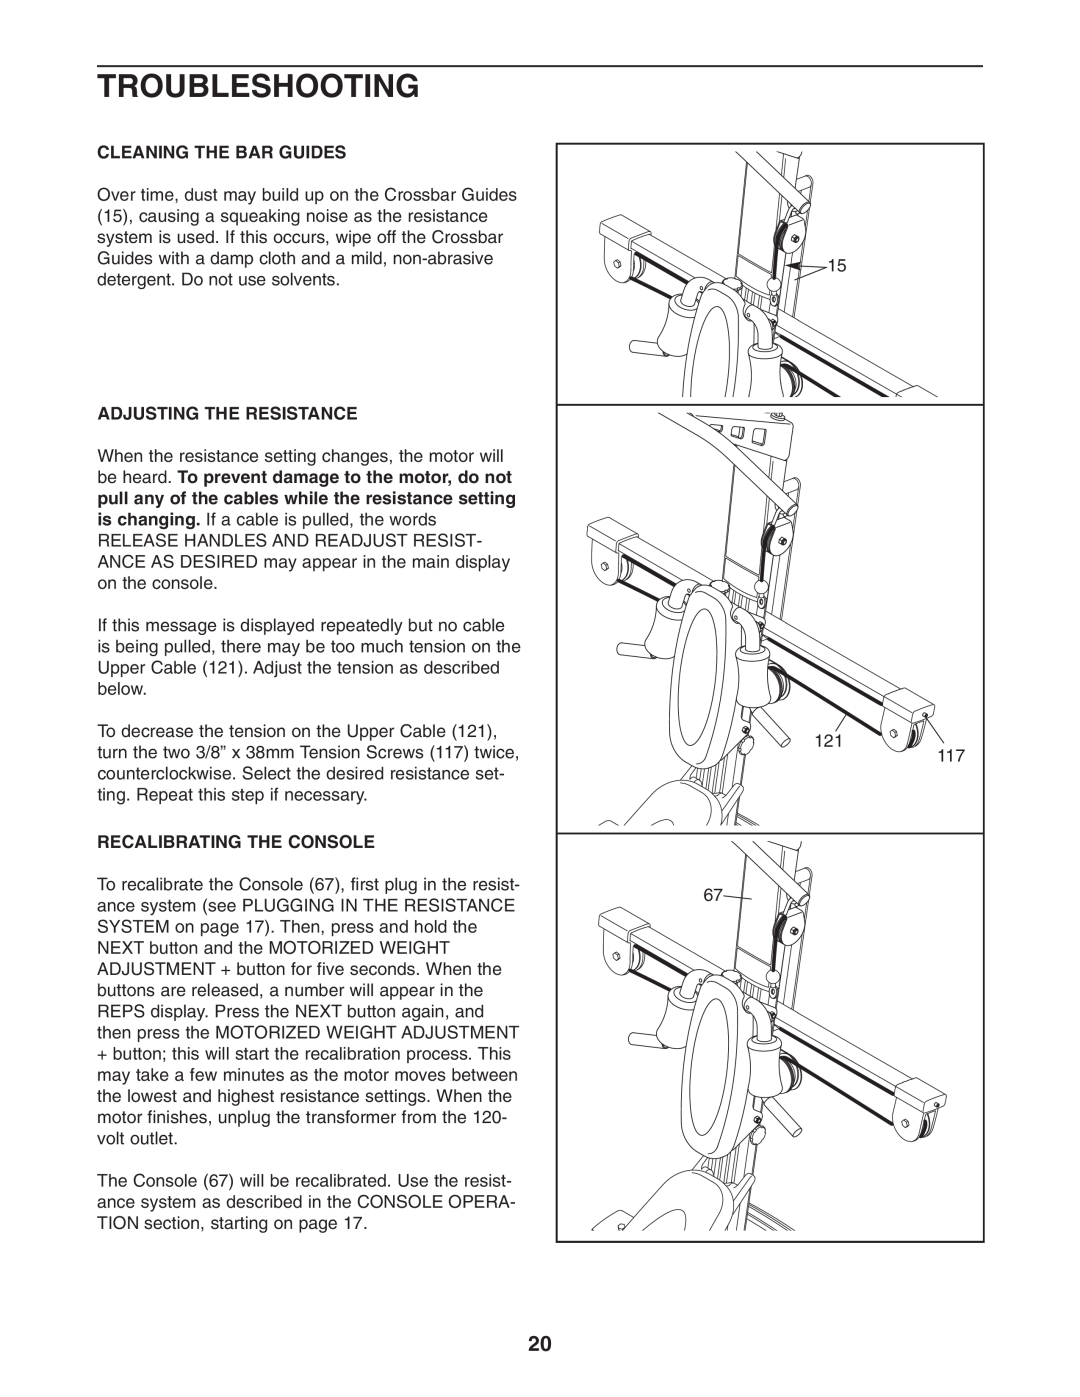 Weider WESY78734 user manual Troubleshooting, Cleaning The Bar Guides, Adjusting The Resistance, Recalibrating The Console 